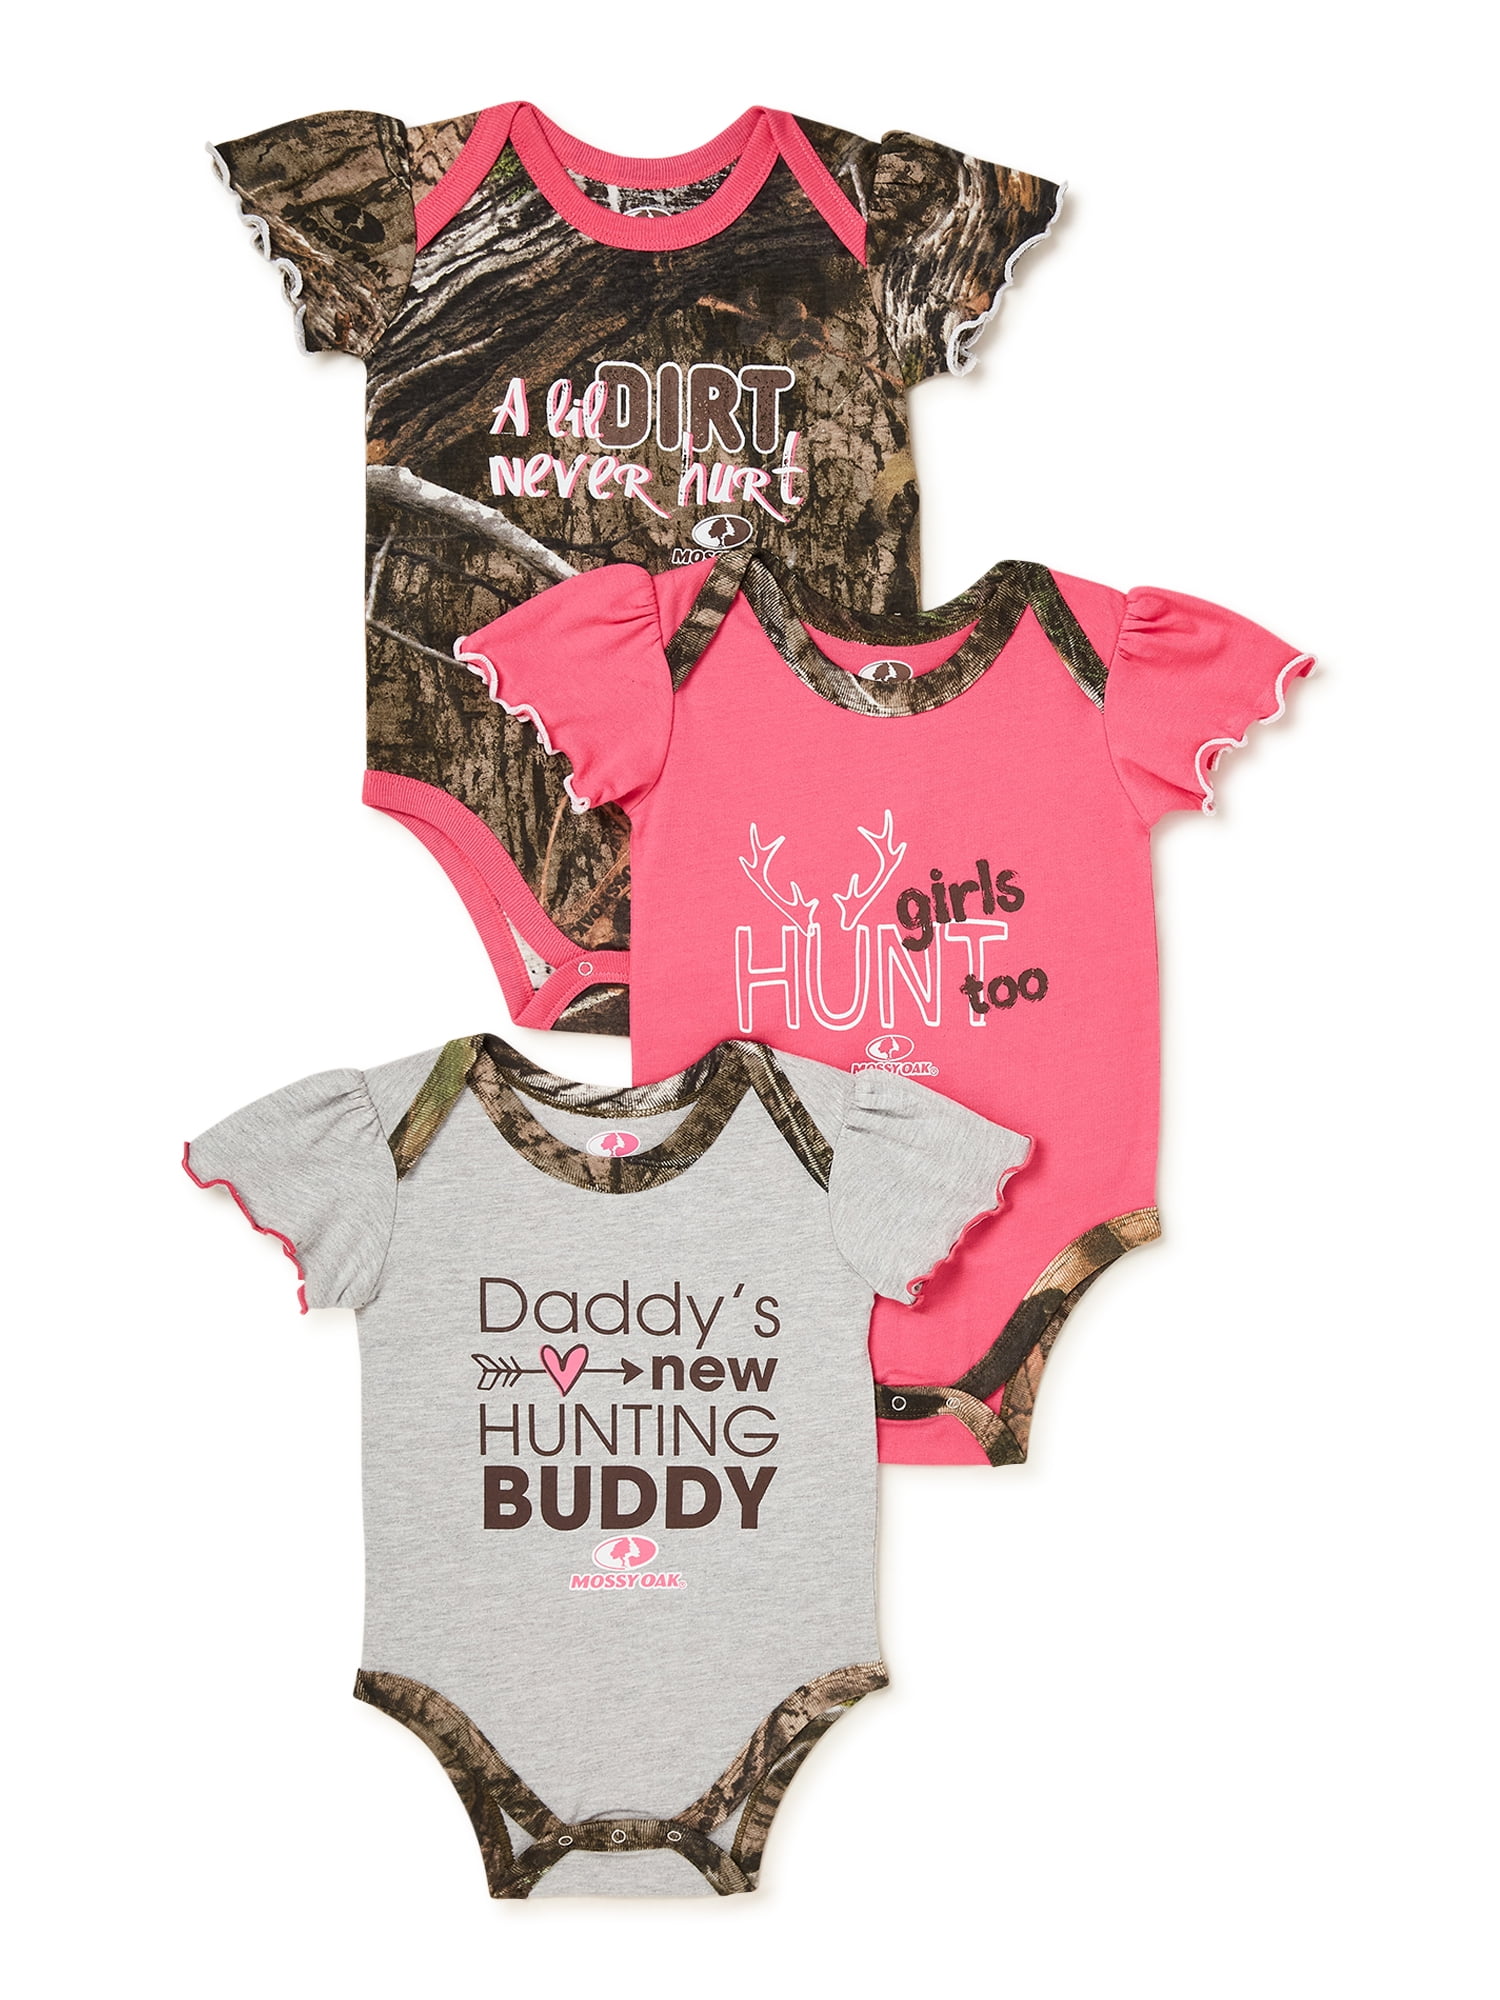 Mossy Oak Baby Girl Hunting Bodysuits, 3-Pack, Sizes 0/3-24 Months